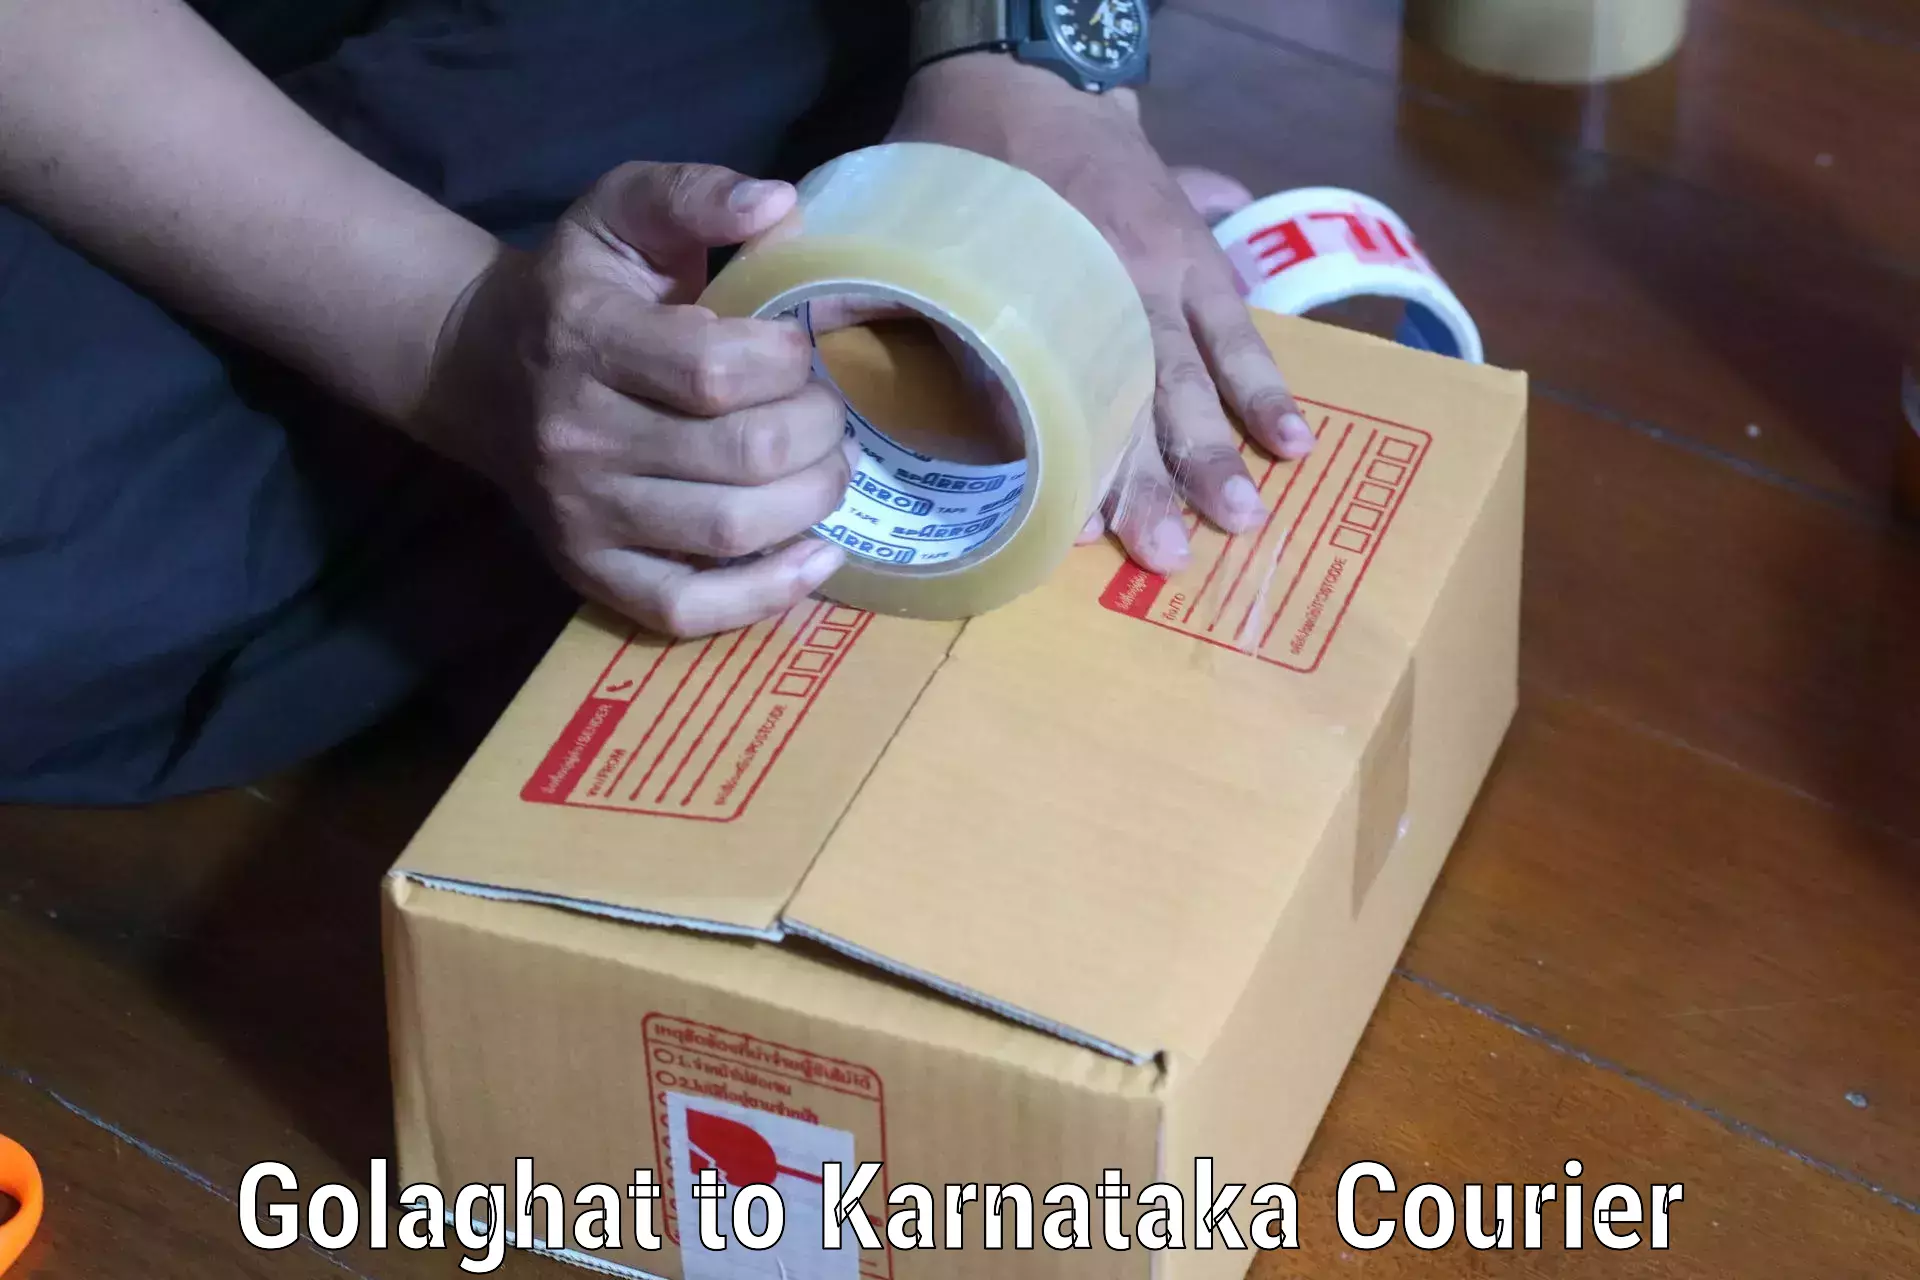 Professional courier handling Golaghat to Yellapur